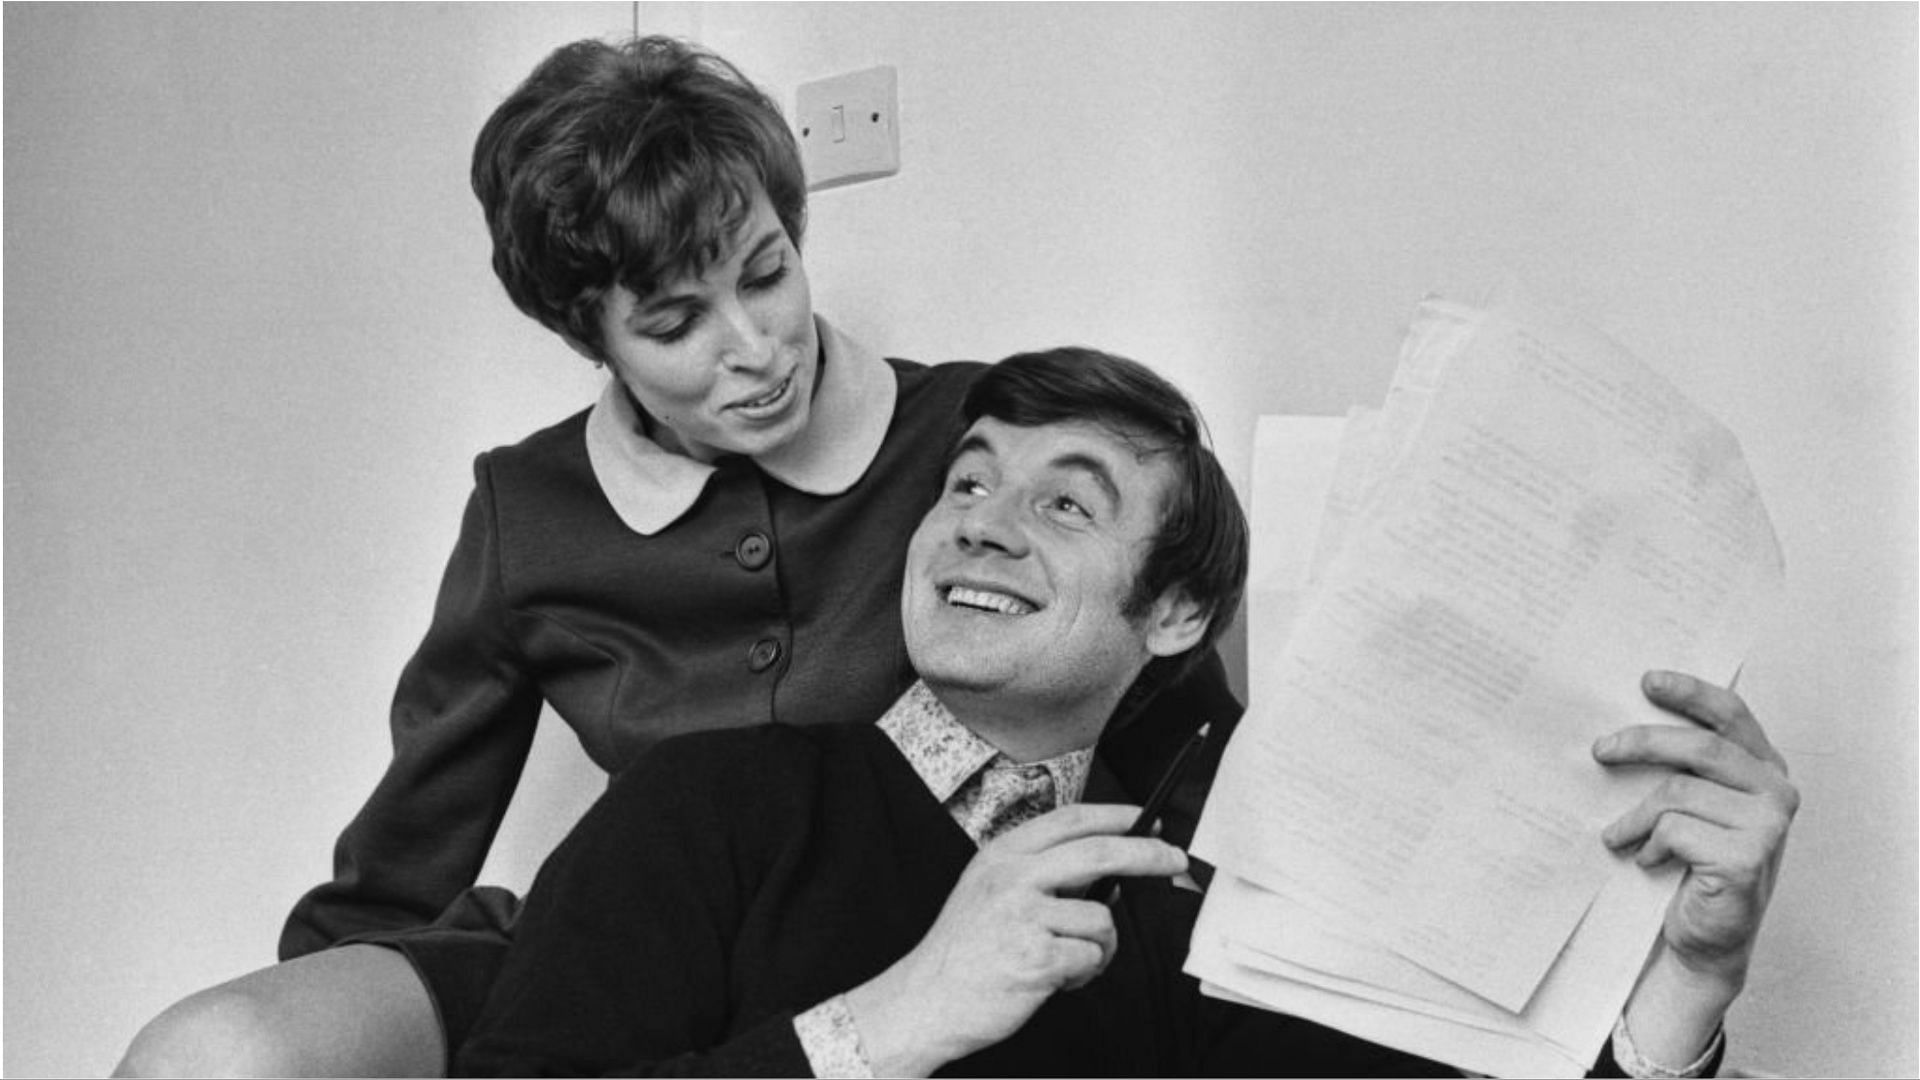 Michael Palin and Helen Gibbins first met when they were 16 years old (Image via Popperfoto/Getty Images)